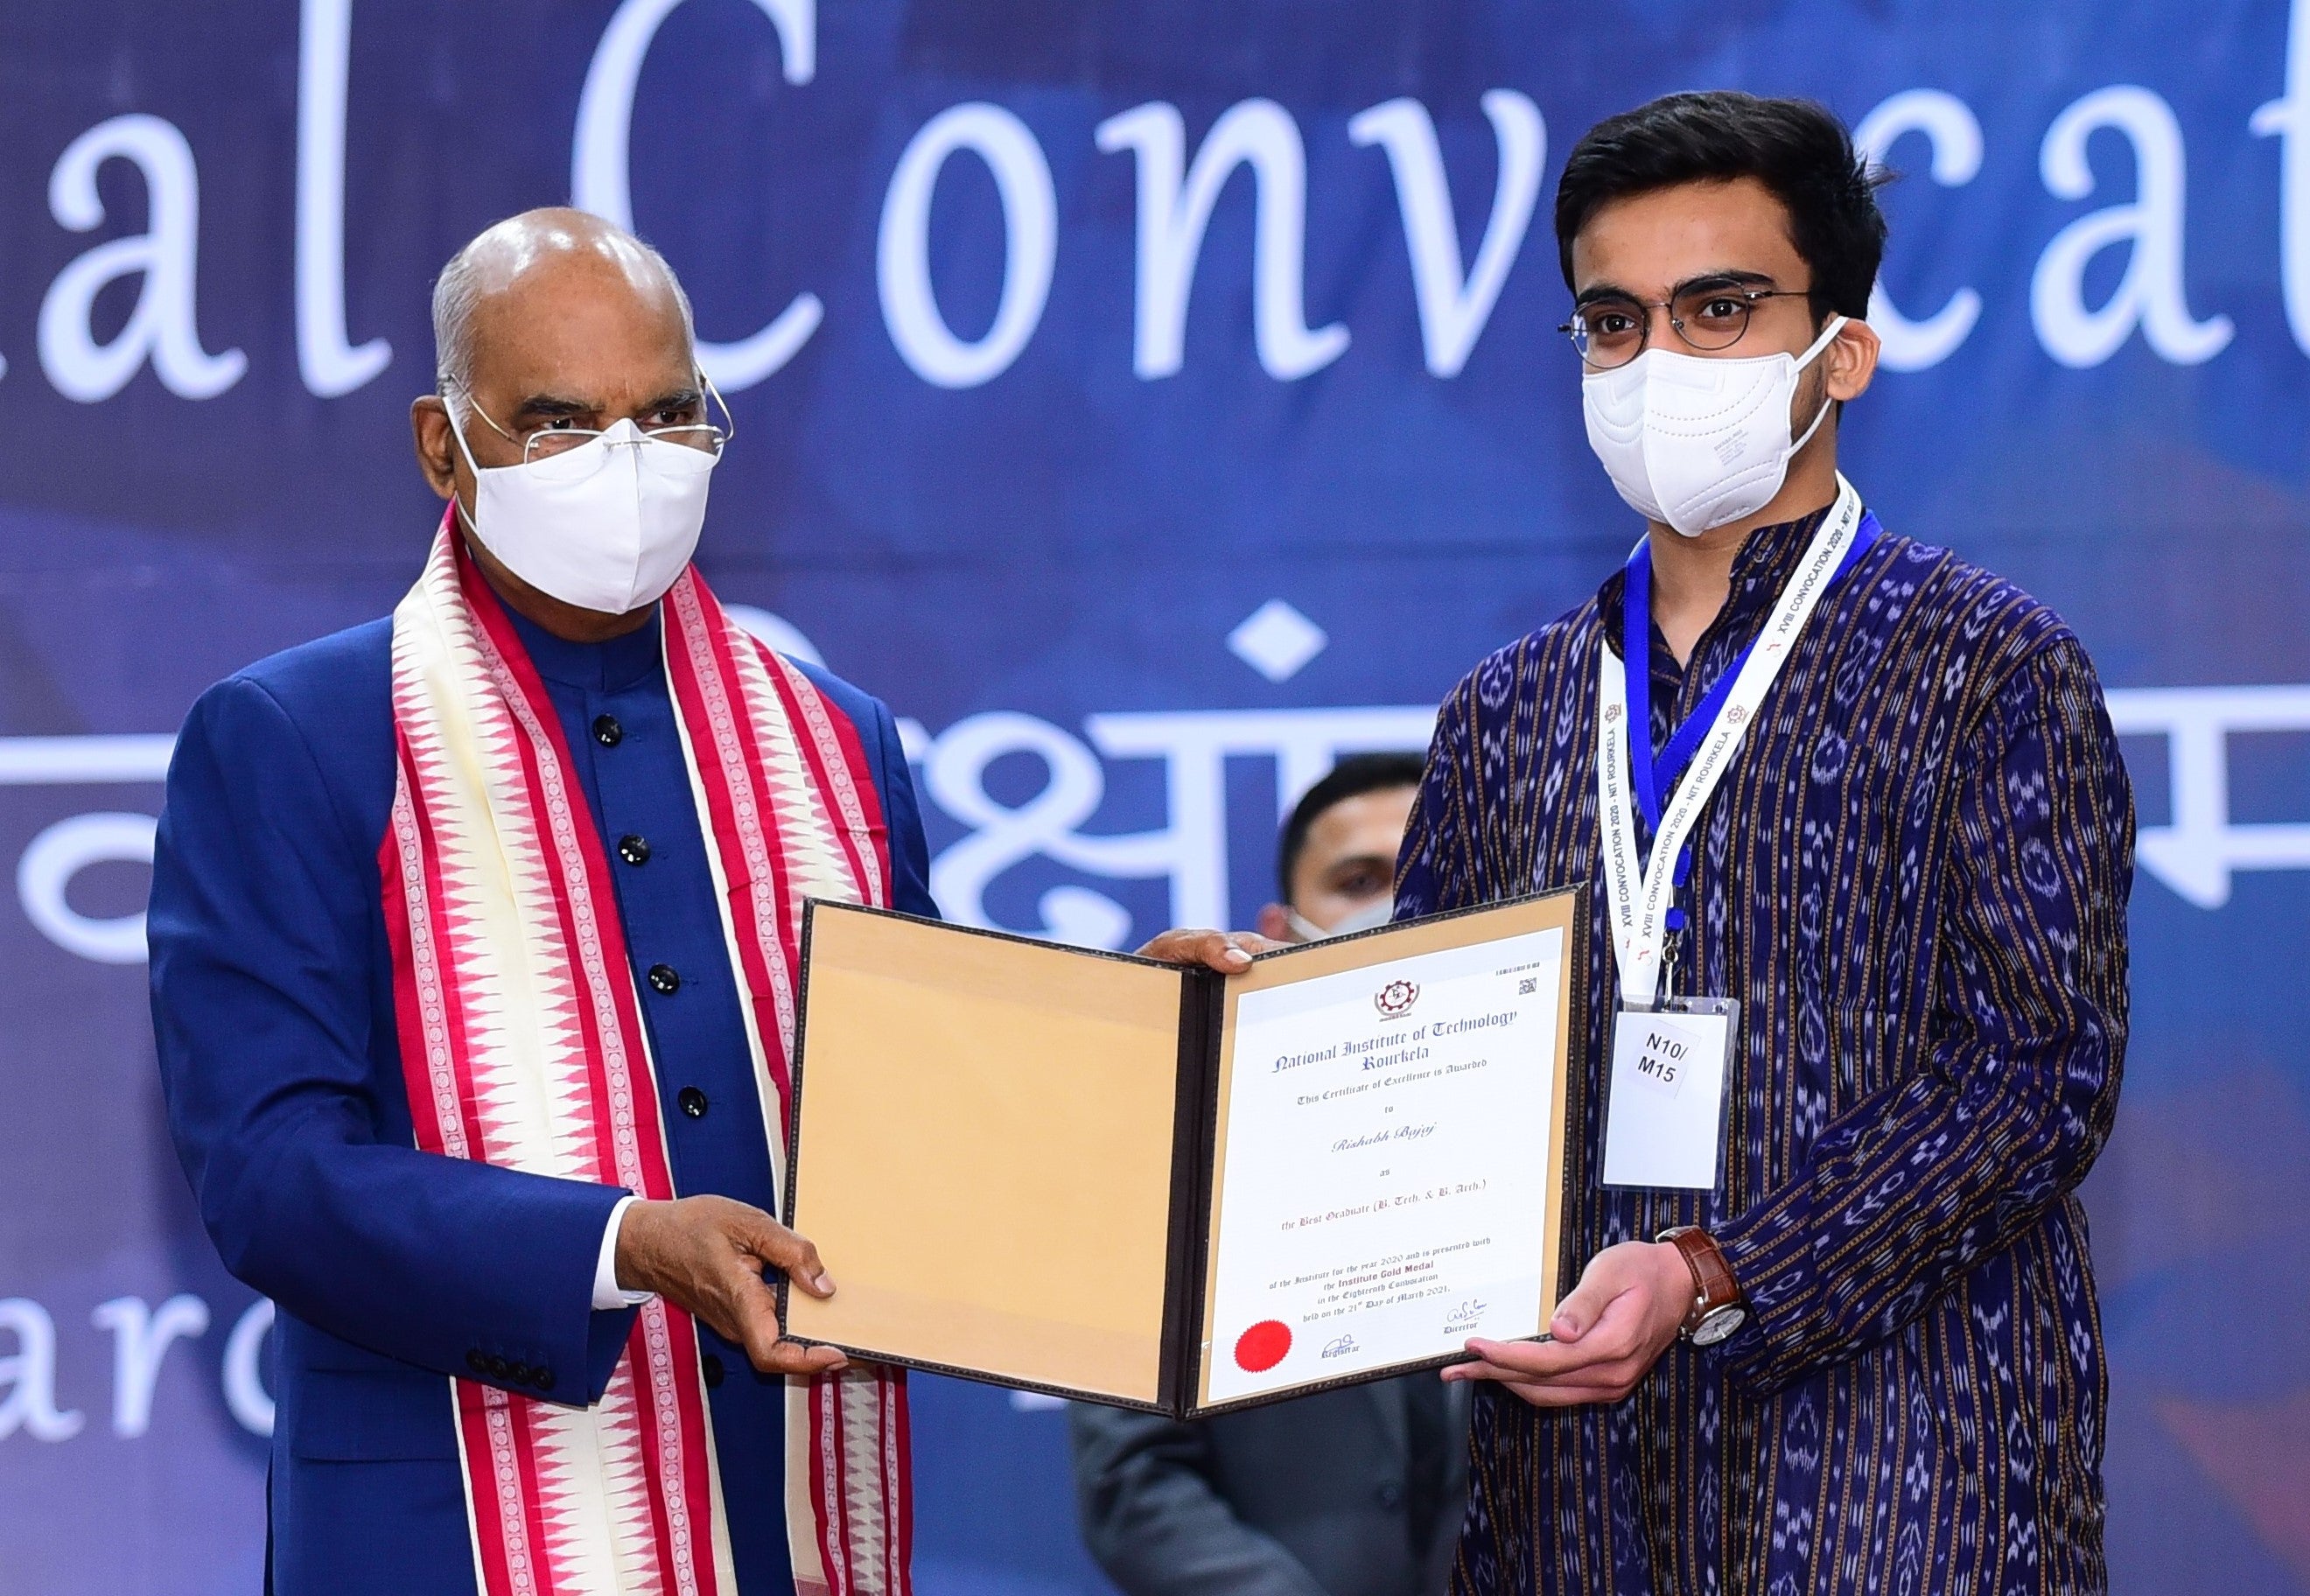 Waterloo Engineering doctoral student Rishabh Bajij (right) receives his award as top undergraduate student at NIT Rourkela from Ram Nath Kovind, the president of India.